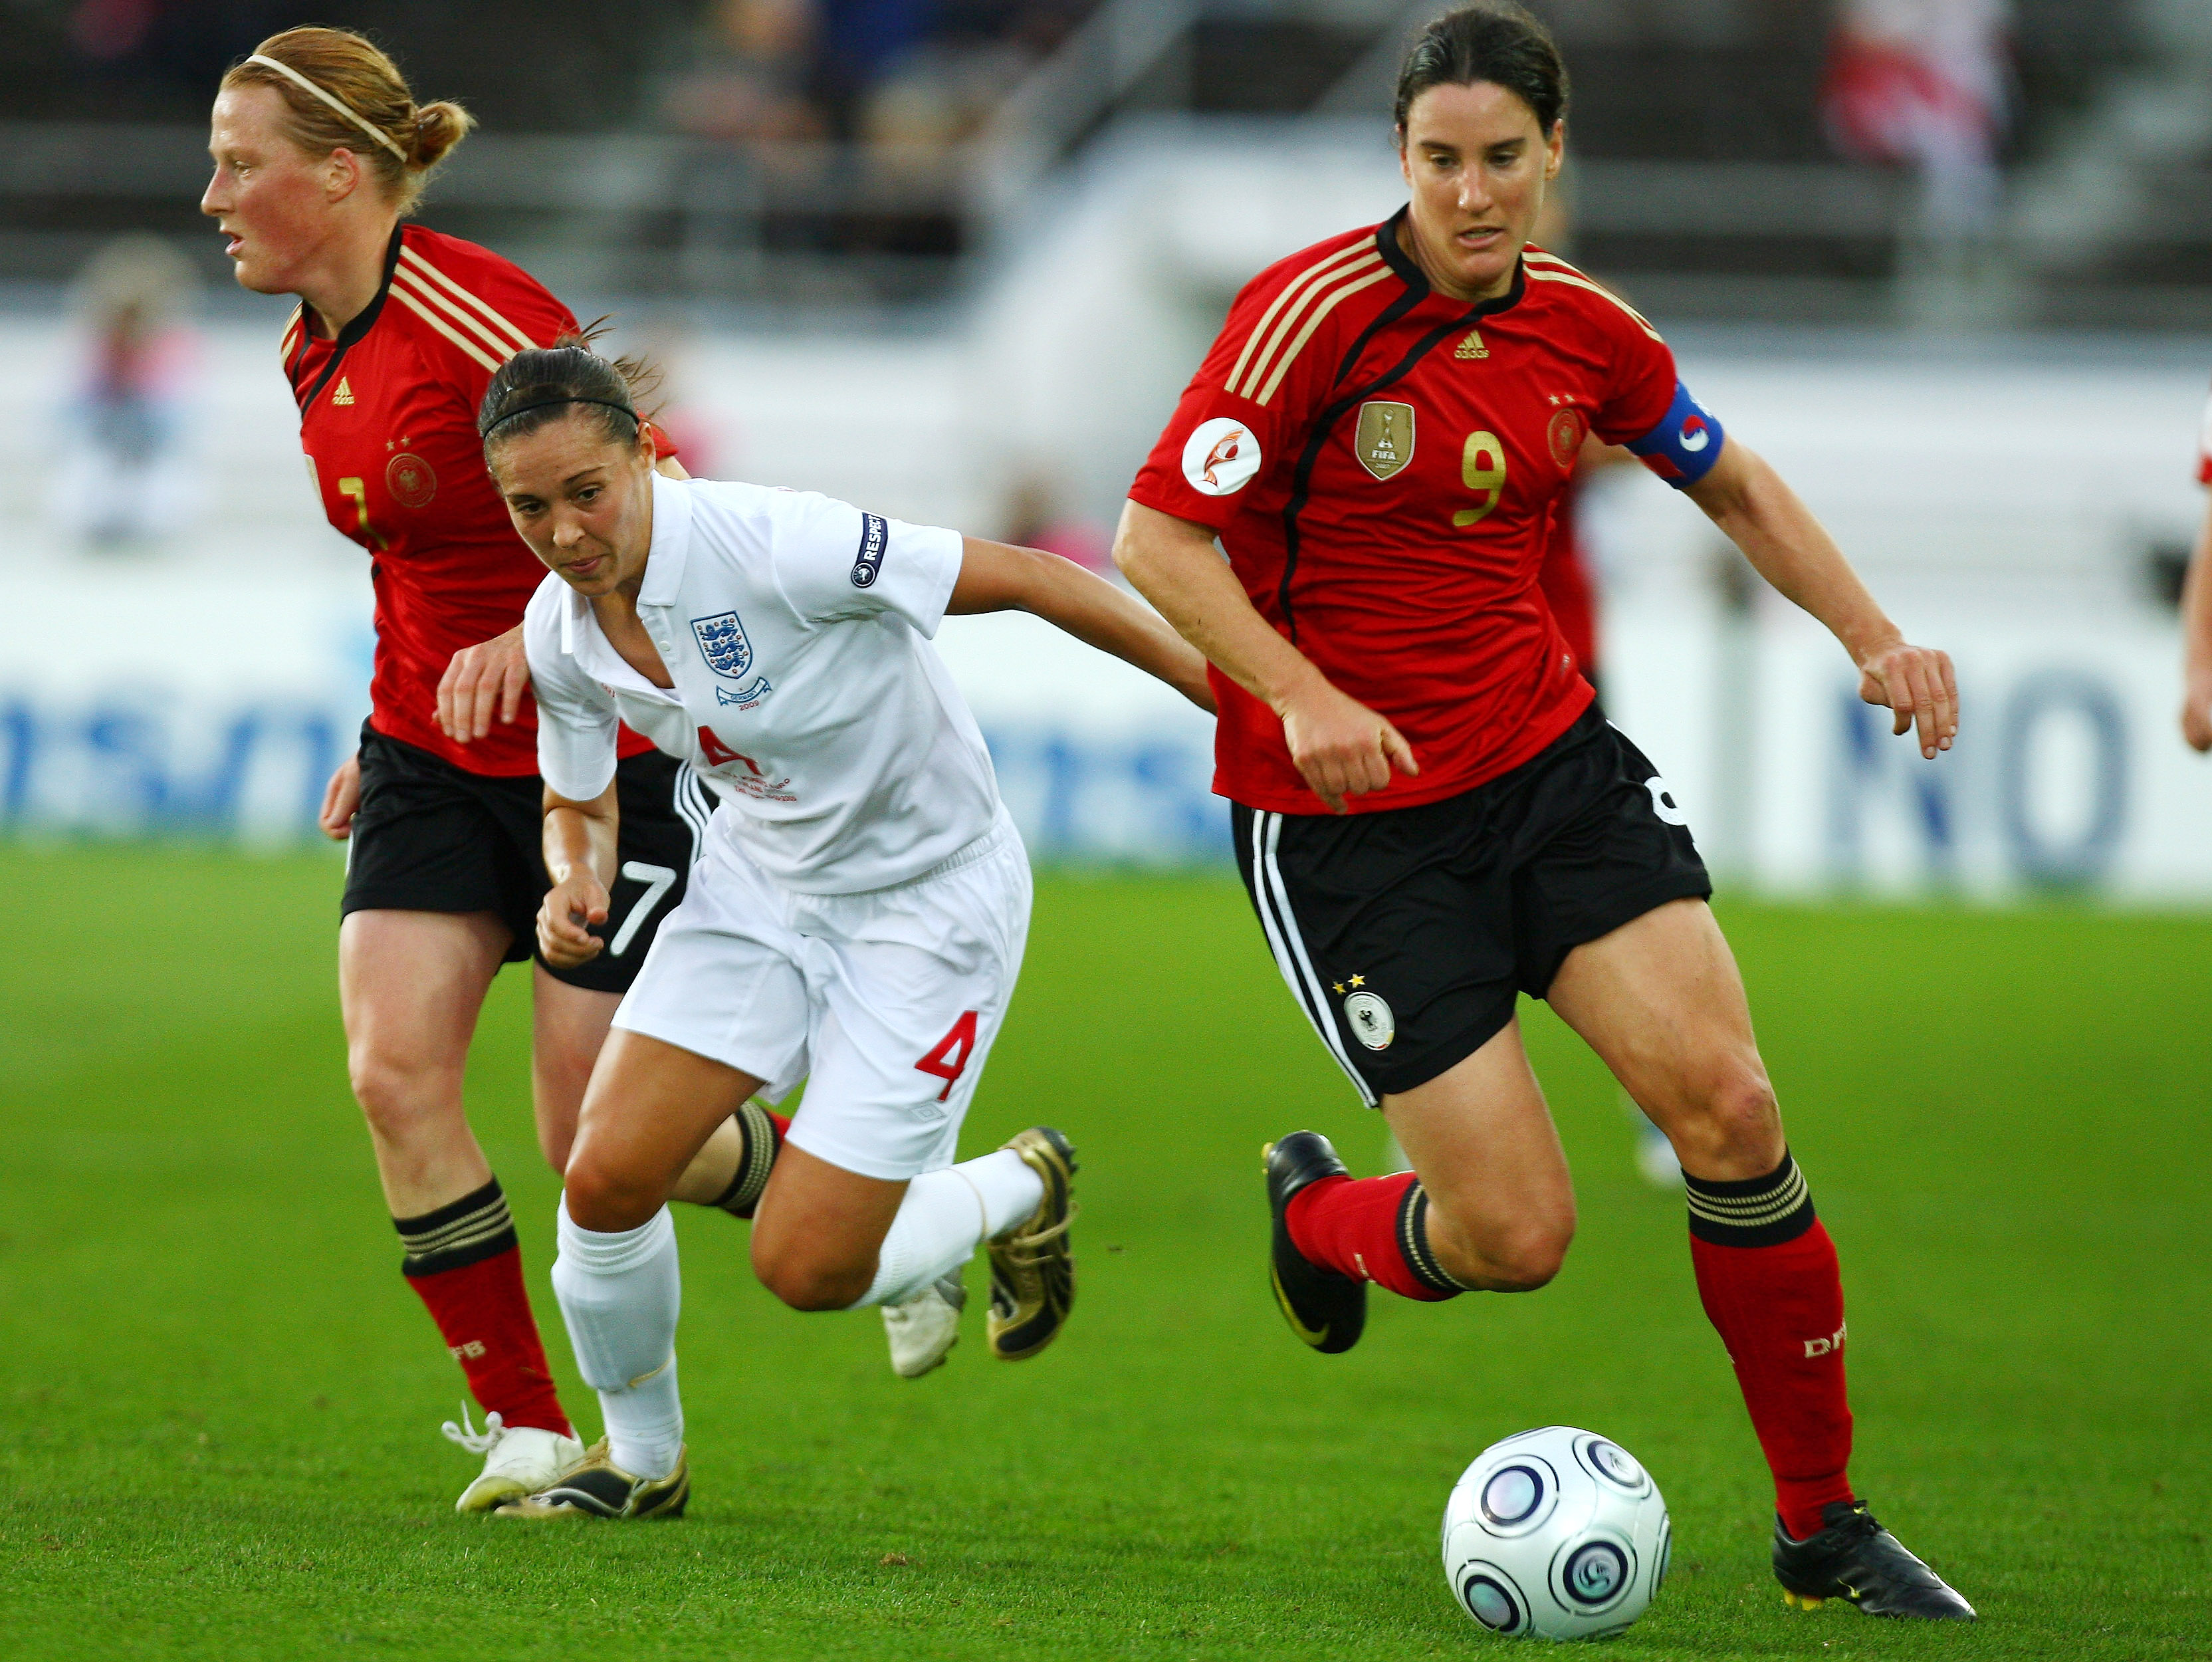 HELSINKI, FINLAND - SEPTEMBER 10:  Fara Williams of England attempts to tackle Birgit Prinz of Germany during the UEFA Women's Euro 2009 Final match between England and Germany at the Helsinki Olympic Stadium on September 10, 2009 in Helsinki, Finland.  (